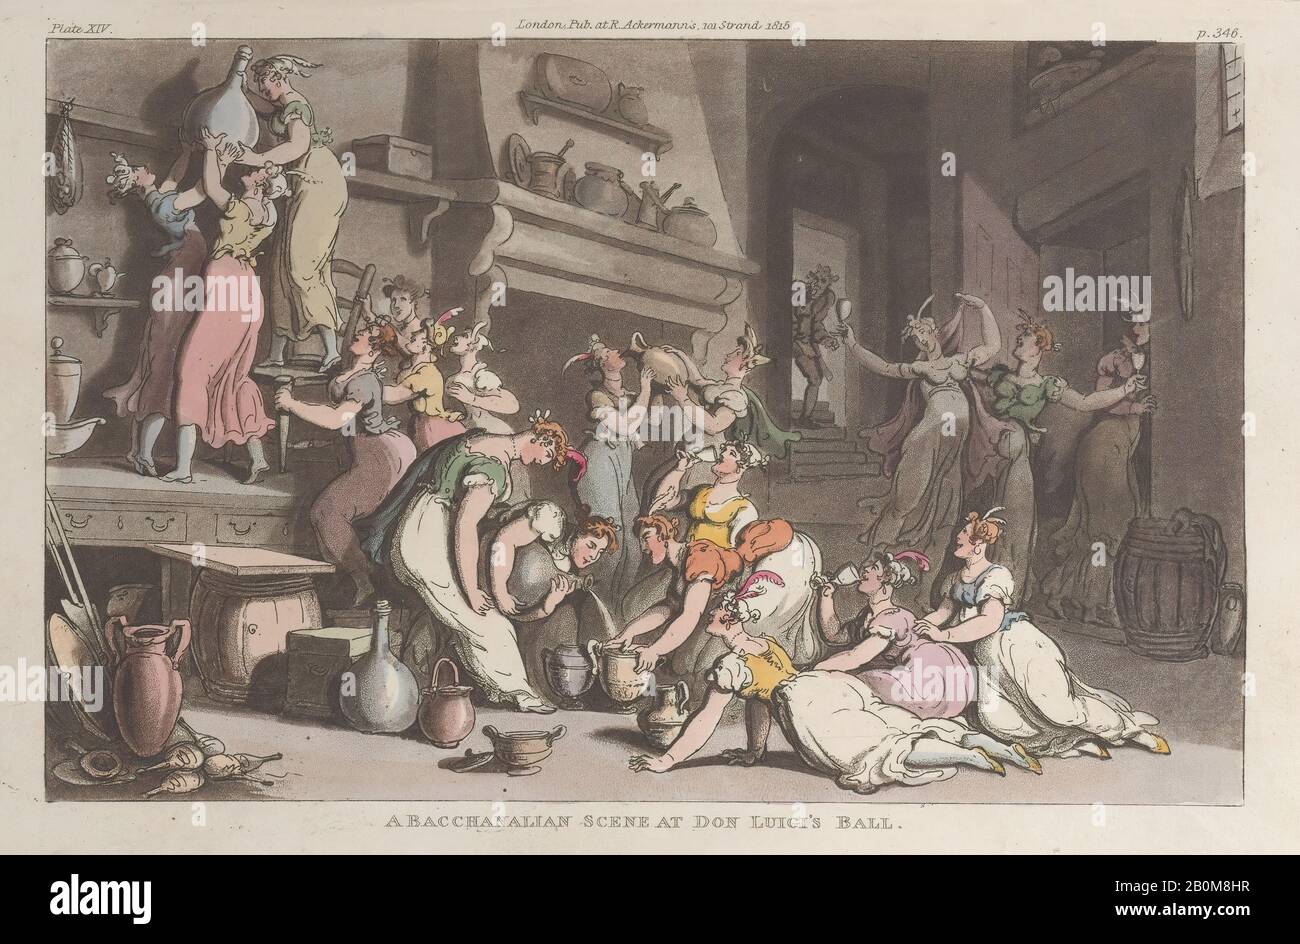 Thomas Rowlandson, A Bacchanalian Scene at Don Luigi's Ball, from 'Naples and the Campagna Felice: in a Series of Letters Addressed to a Friend in England in 1802', 'Naples and the Campagna Felice: in a Series of Letters Addressed to a Friend in England in 1802, Thomas Rowlandson (British, London 1757–1827 London), Lewis Engelbach (British), June 1, 1815, Hand-colored etching and aquatint, Sheet: 5 11/16 × 9 3/16 in. (14.5 × 23.3 cm), Prints Stock Photo